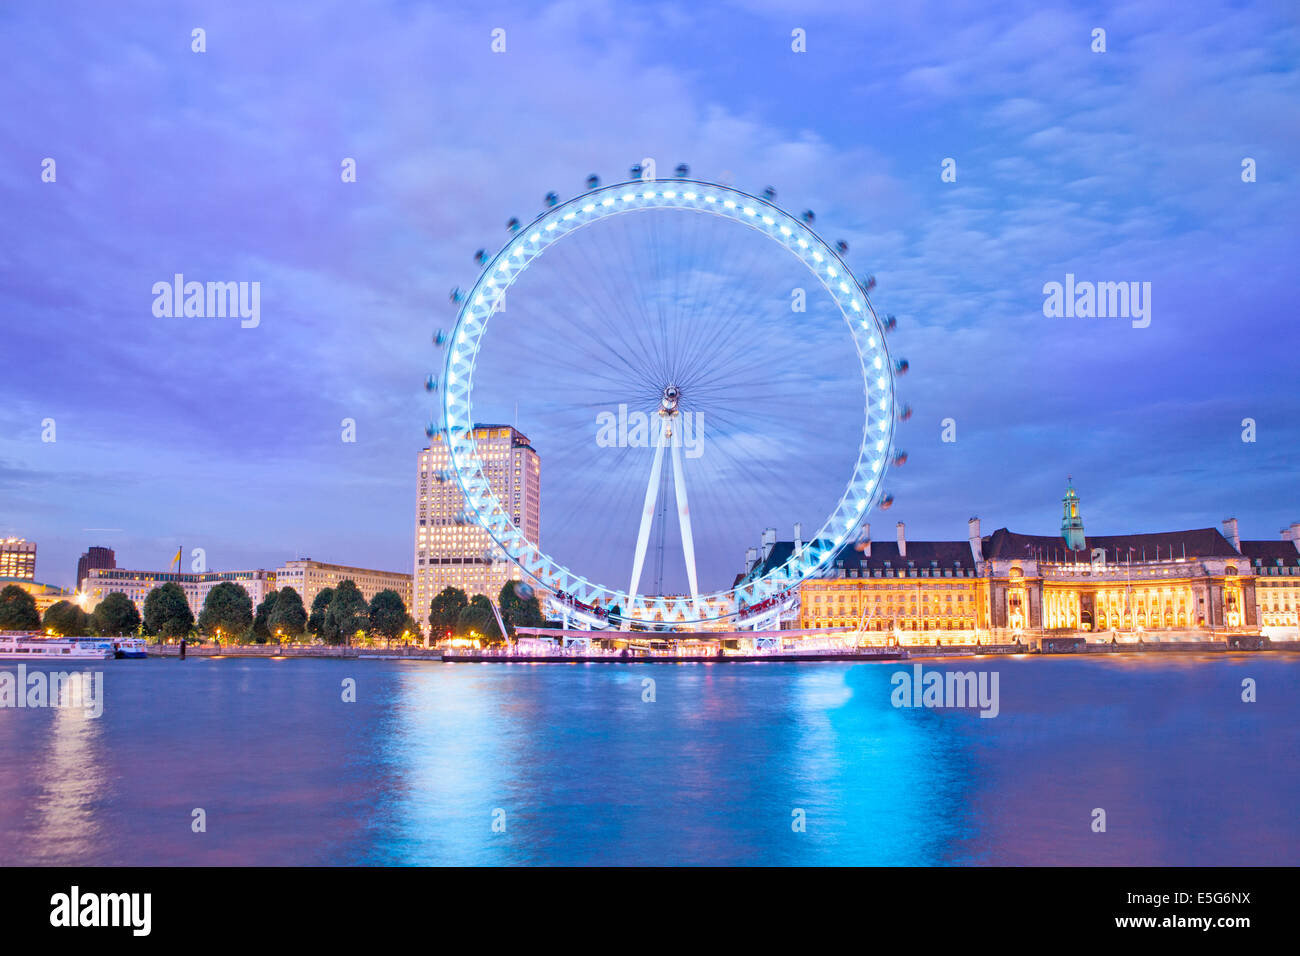 UK, London Eye, County Hall with the London Aquarium and the Shell Building at night Stock Photo